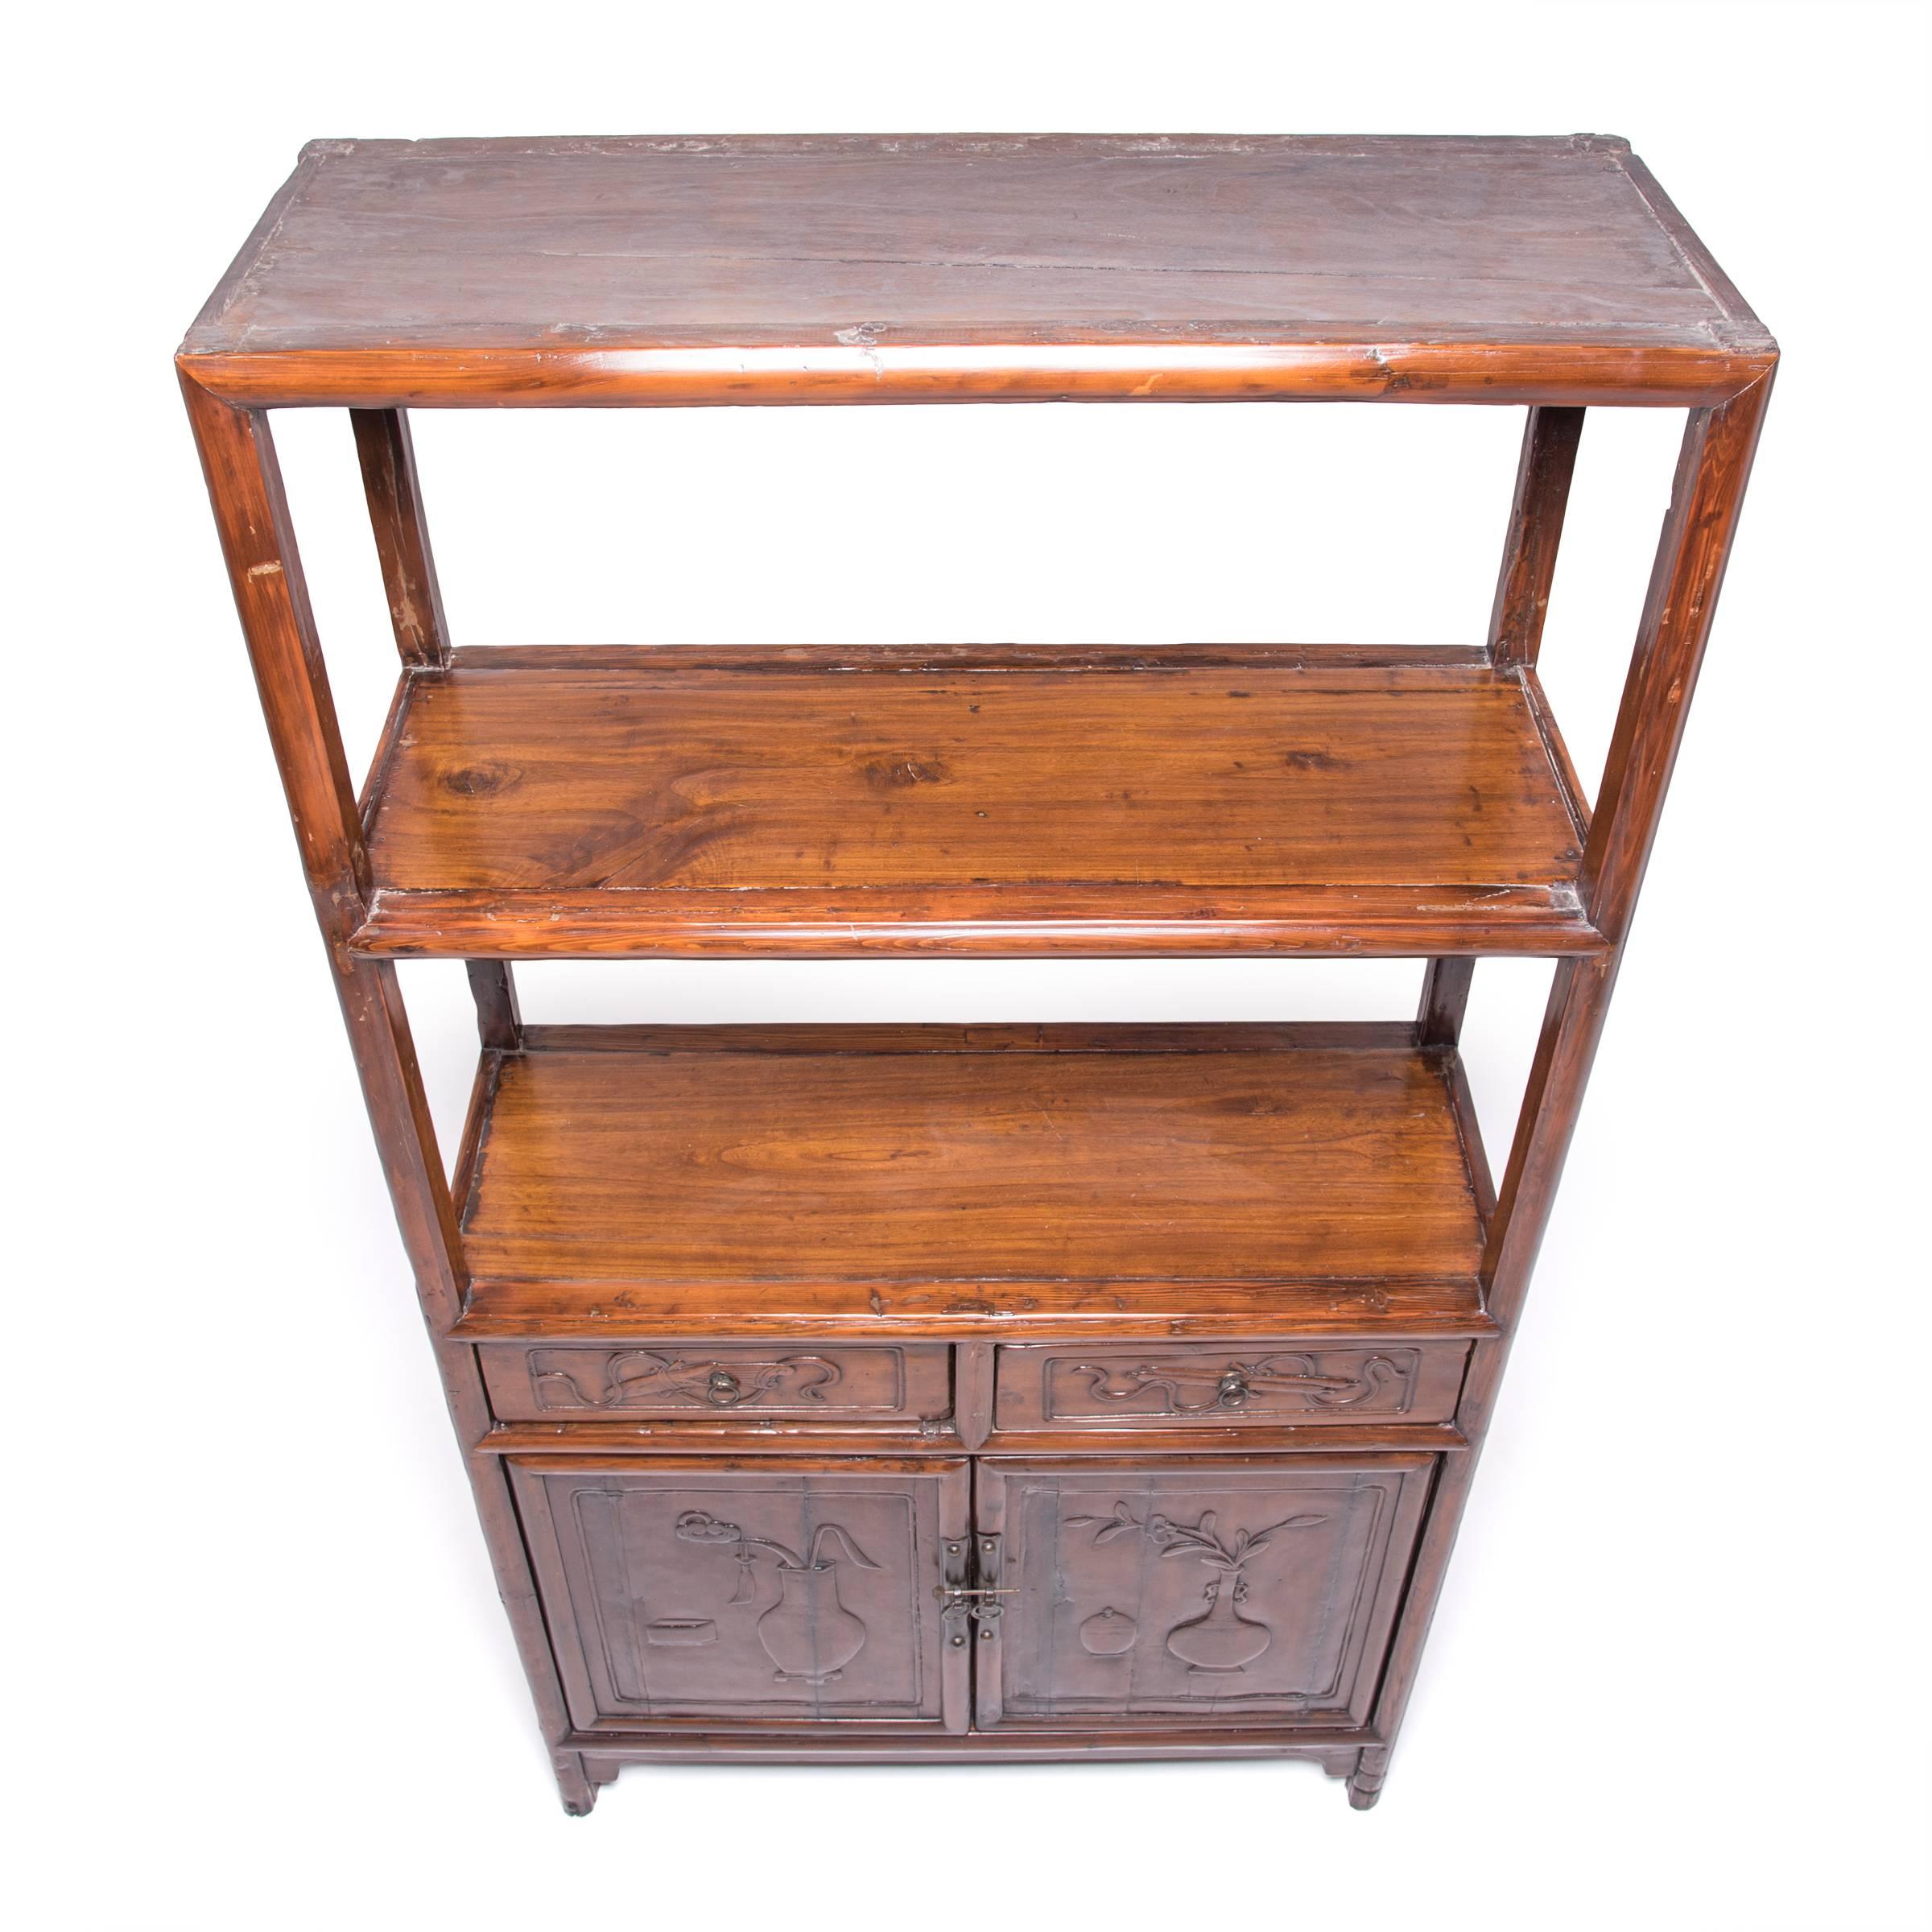 19th Century Chinese Scholars' Display Shelf, c. 1850 For Sale